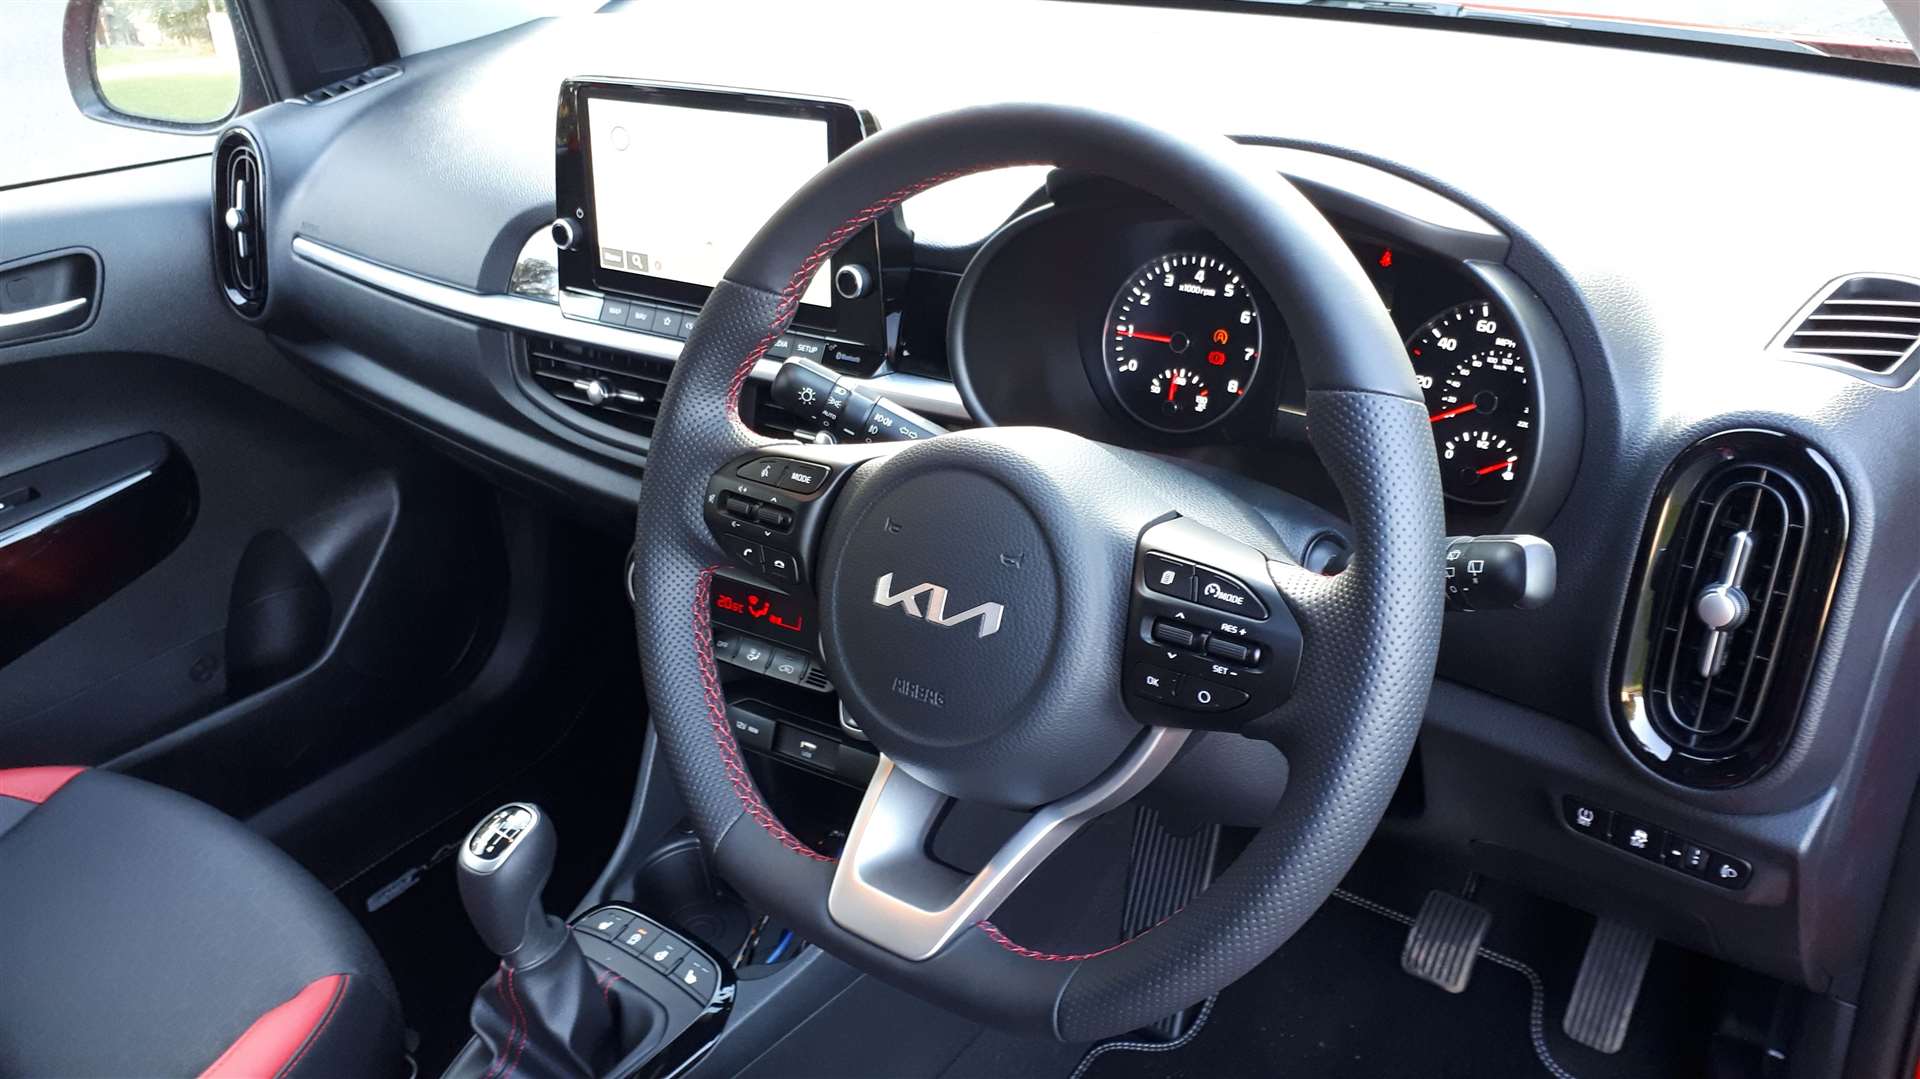 Features include the latest infotainment system.